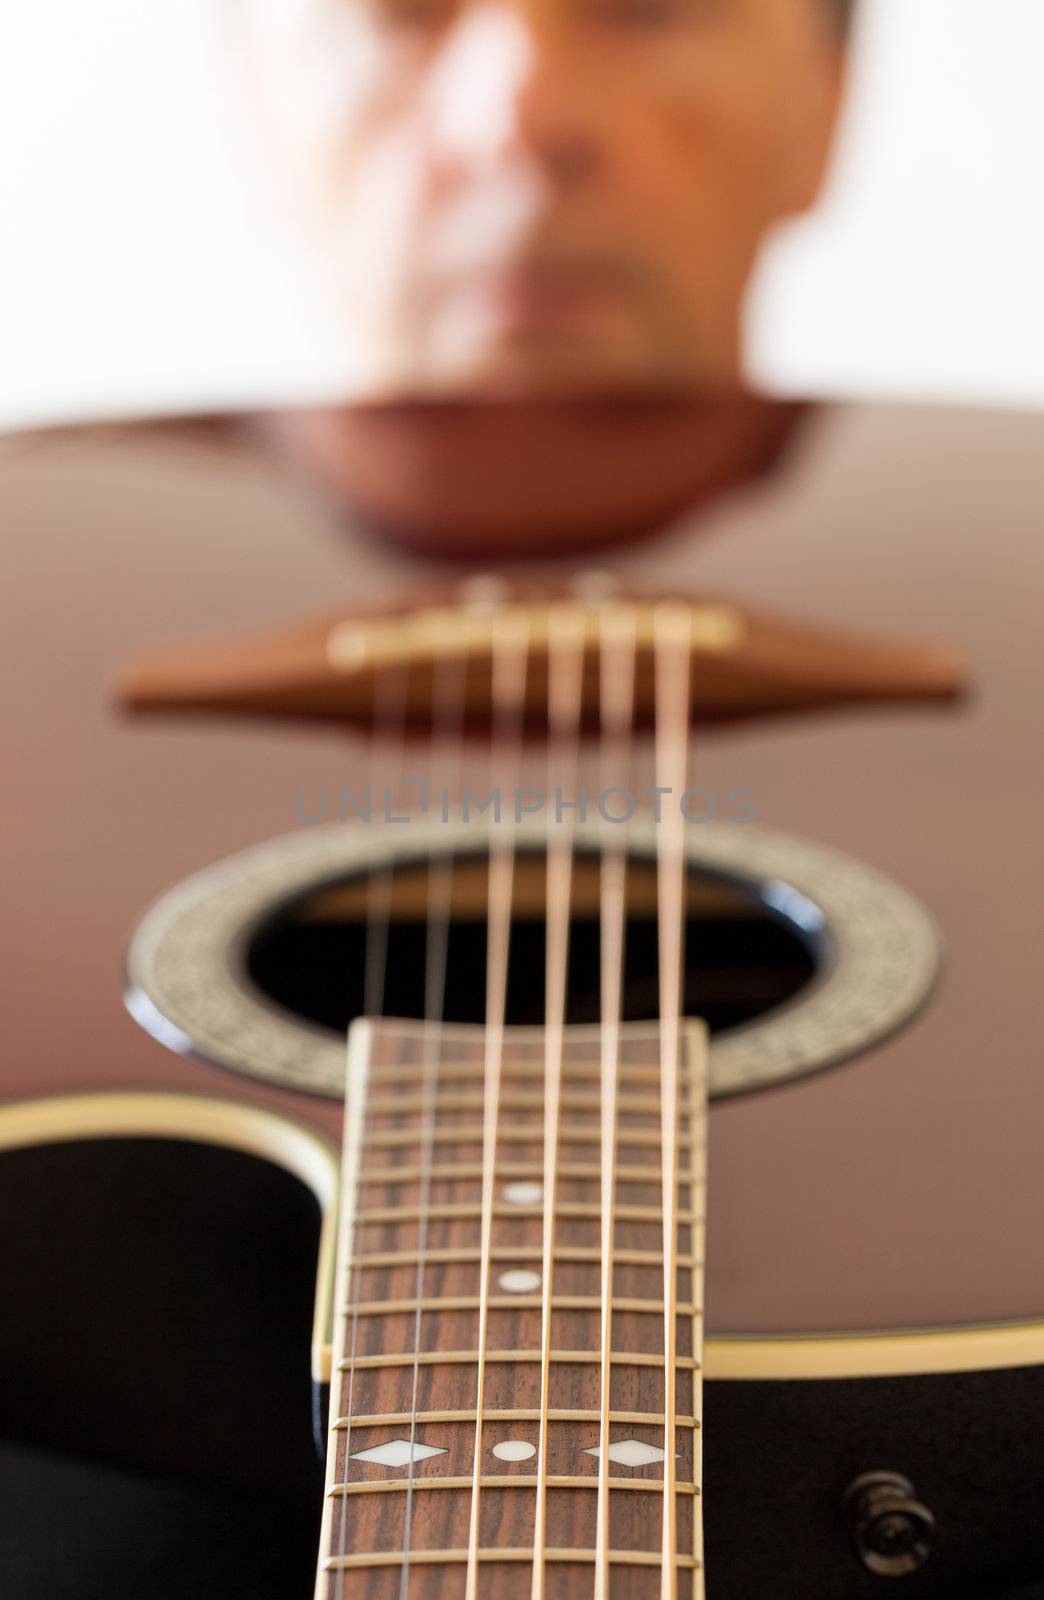 Macro shot down the fretboard of acoustic guitar with shallow depth of field with guitarist face in the distance reflected